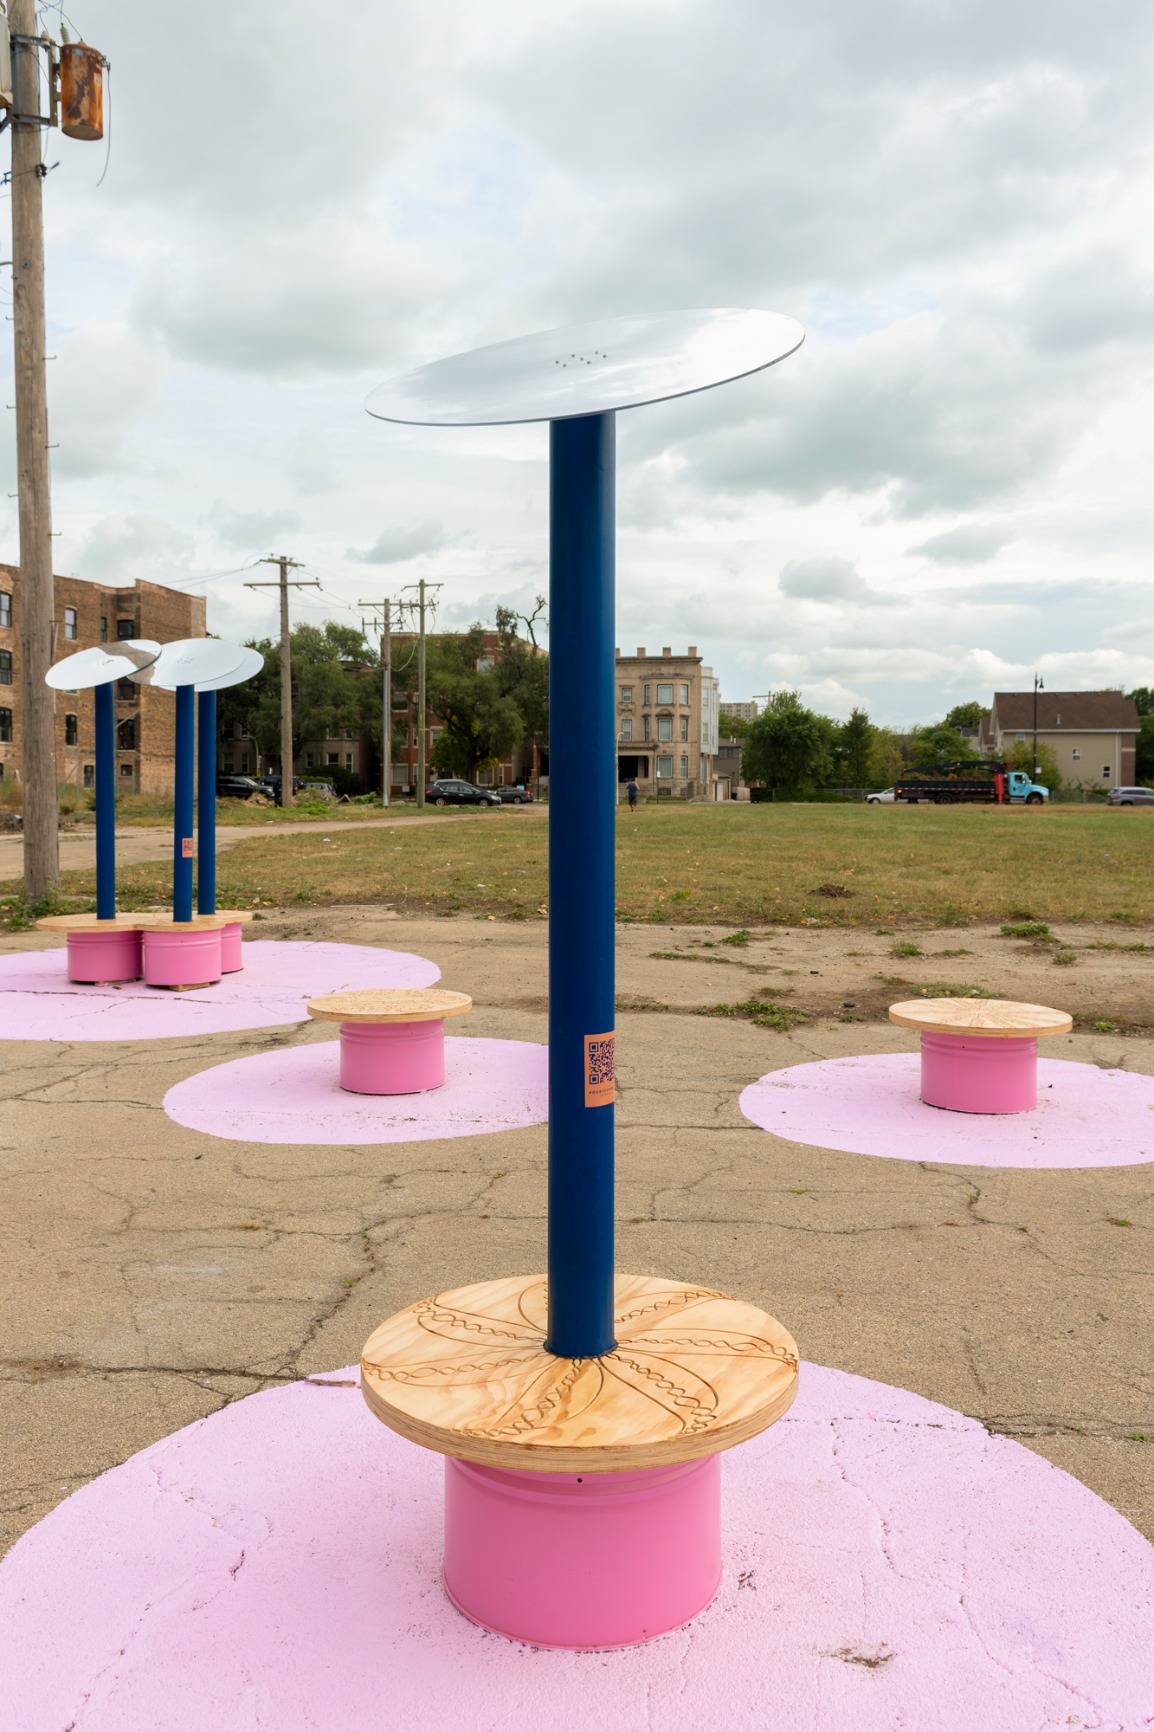 Photo showing pavilion. Reflective disks are held on top of blue poles which are fixed into pink benches with timber tops. There are pink rings painted on the ground where a bench appears. There are QR codes on each pole.